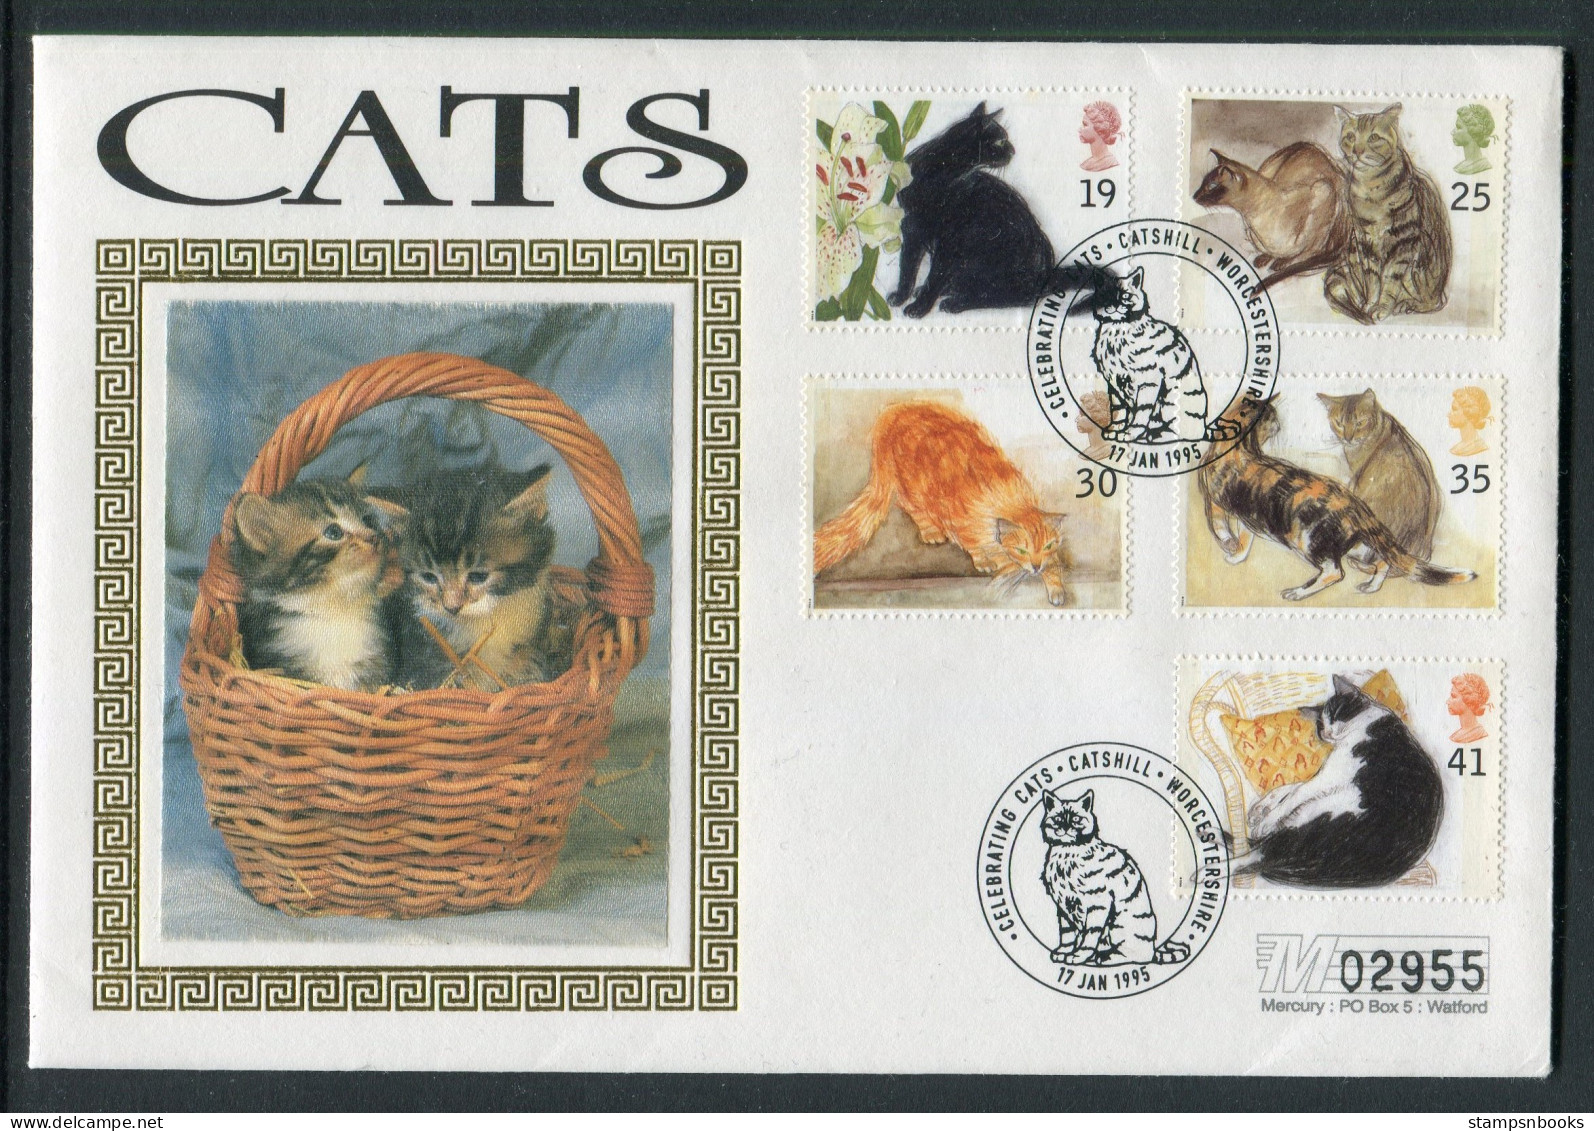 1995 GB Cats First Day Cover, Catshill Worcestershire FDC - 1991-2000 Dezimalausgaben